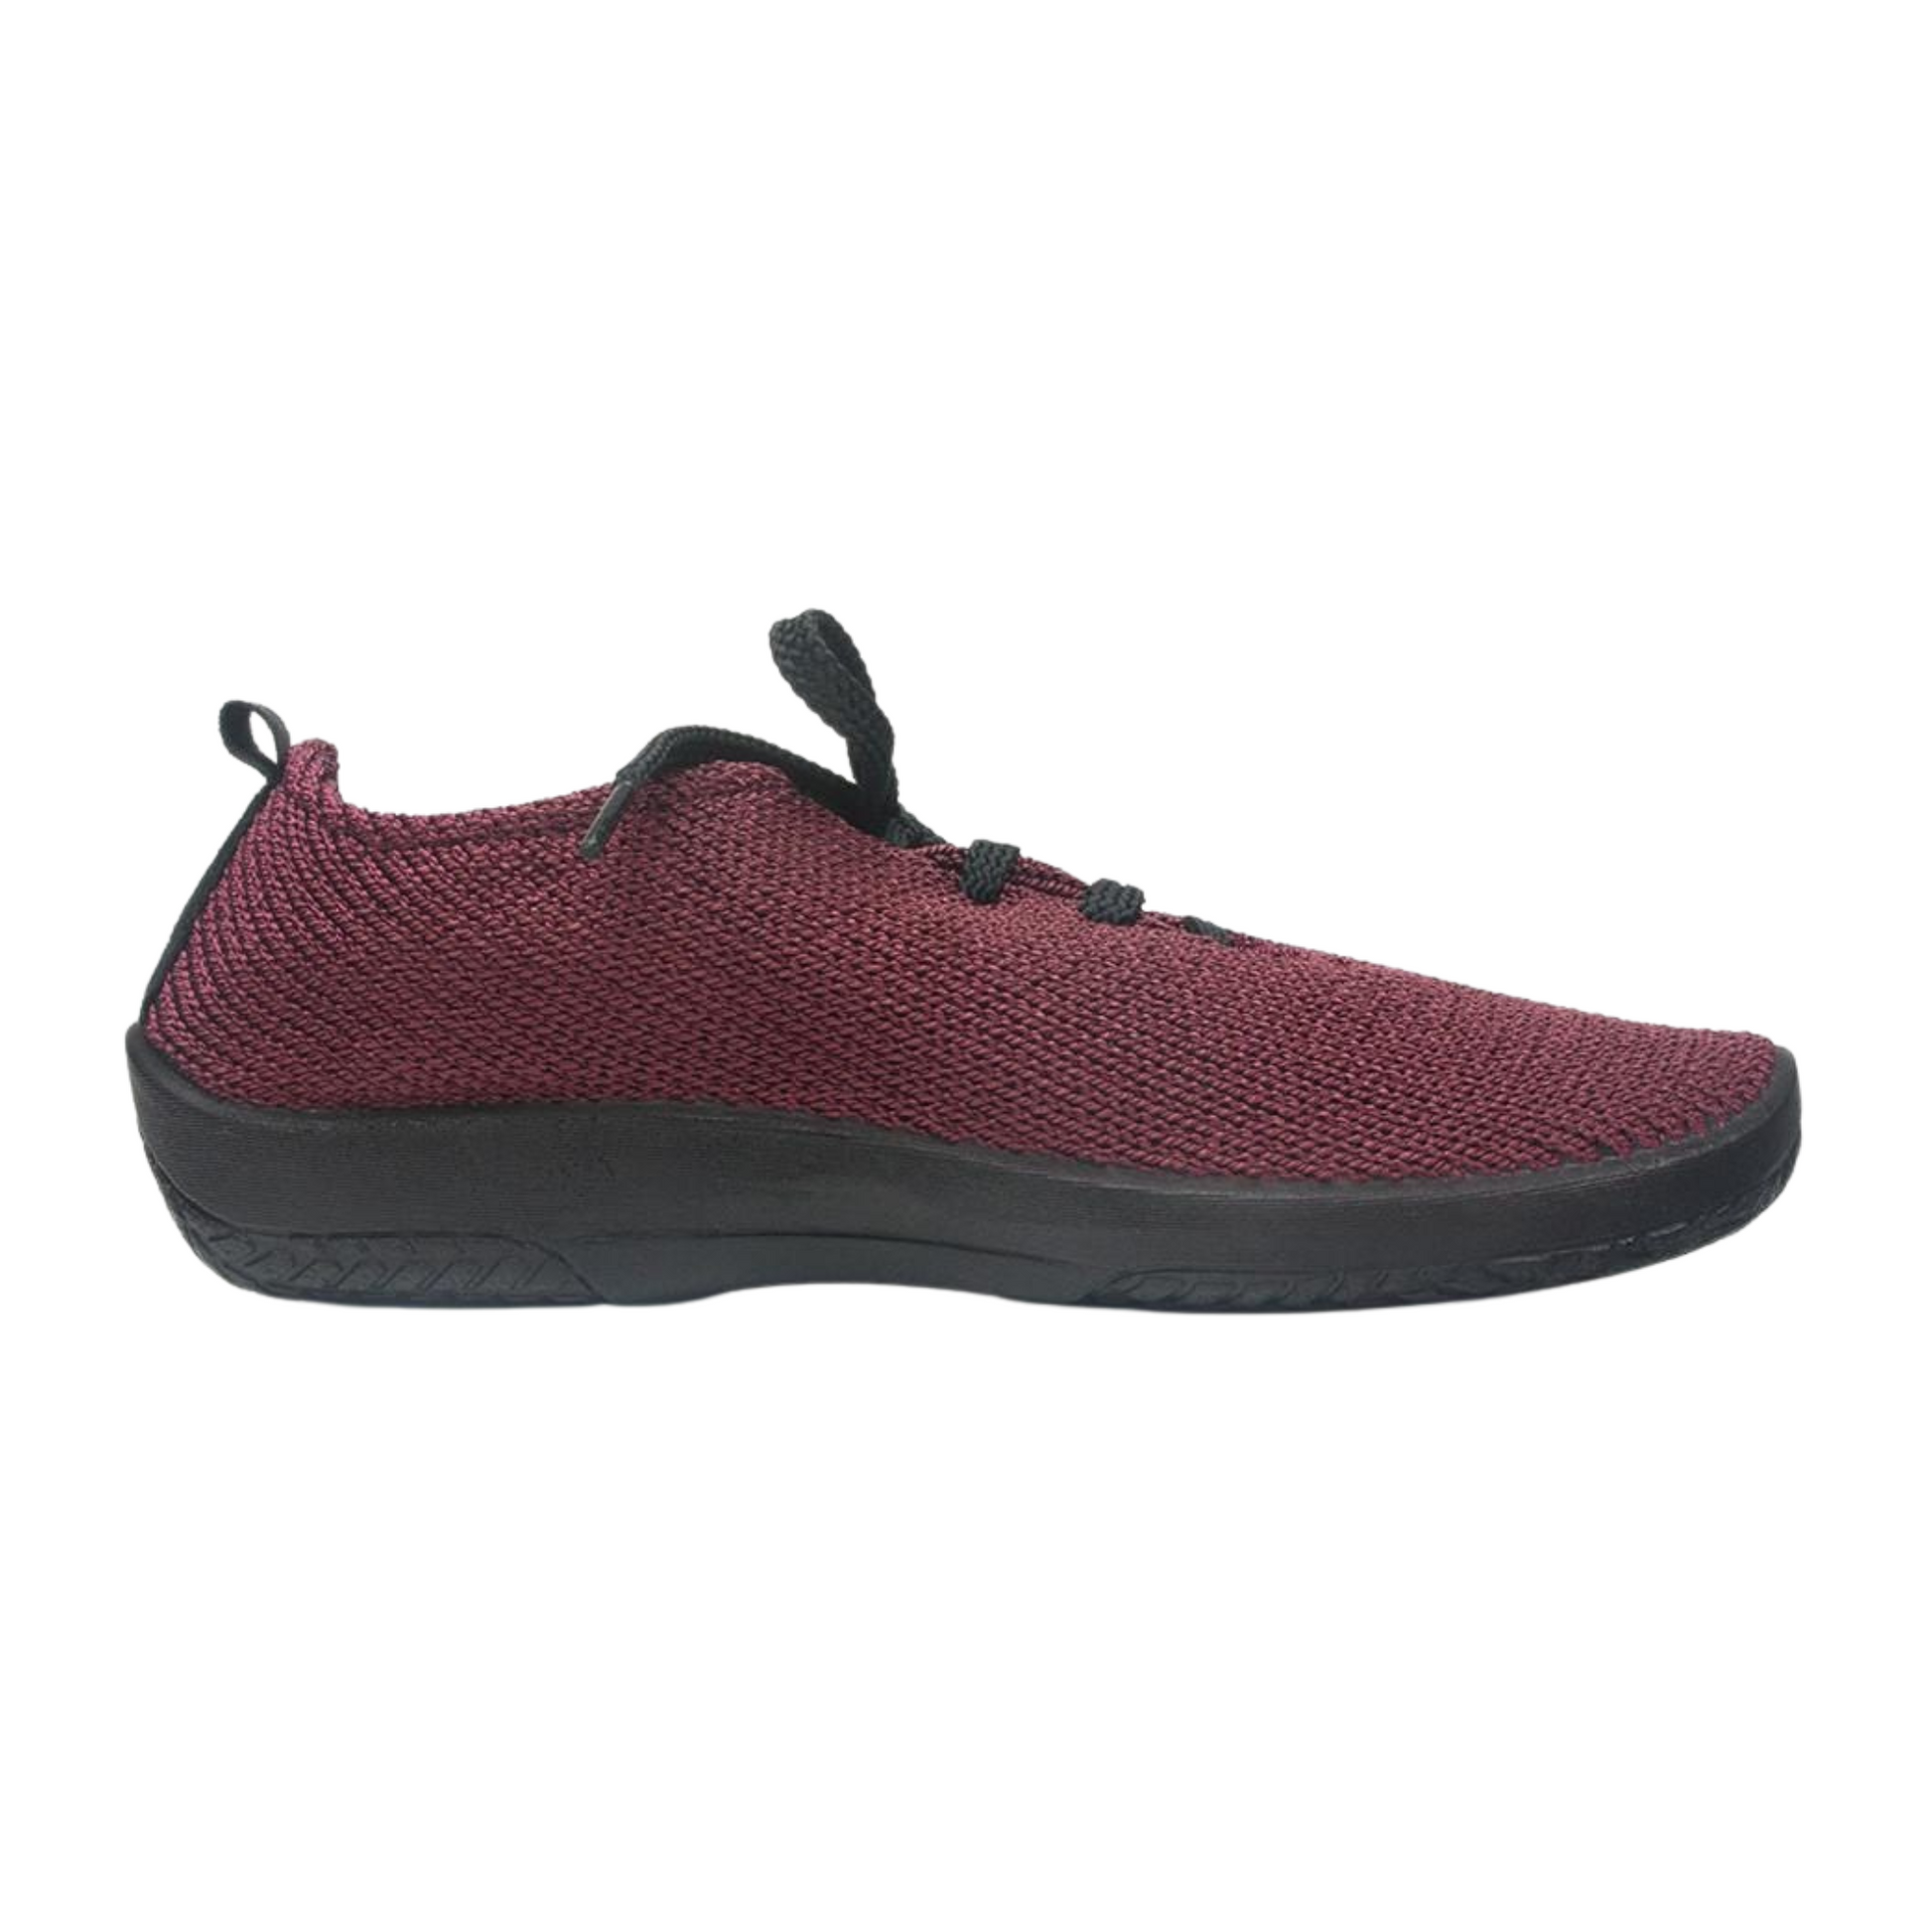 A right side view of a burgundy coloured knit shoe with black laces.